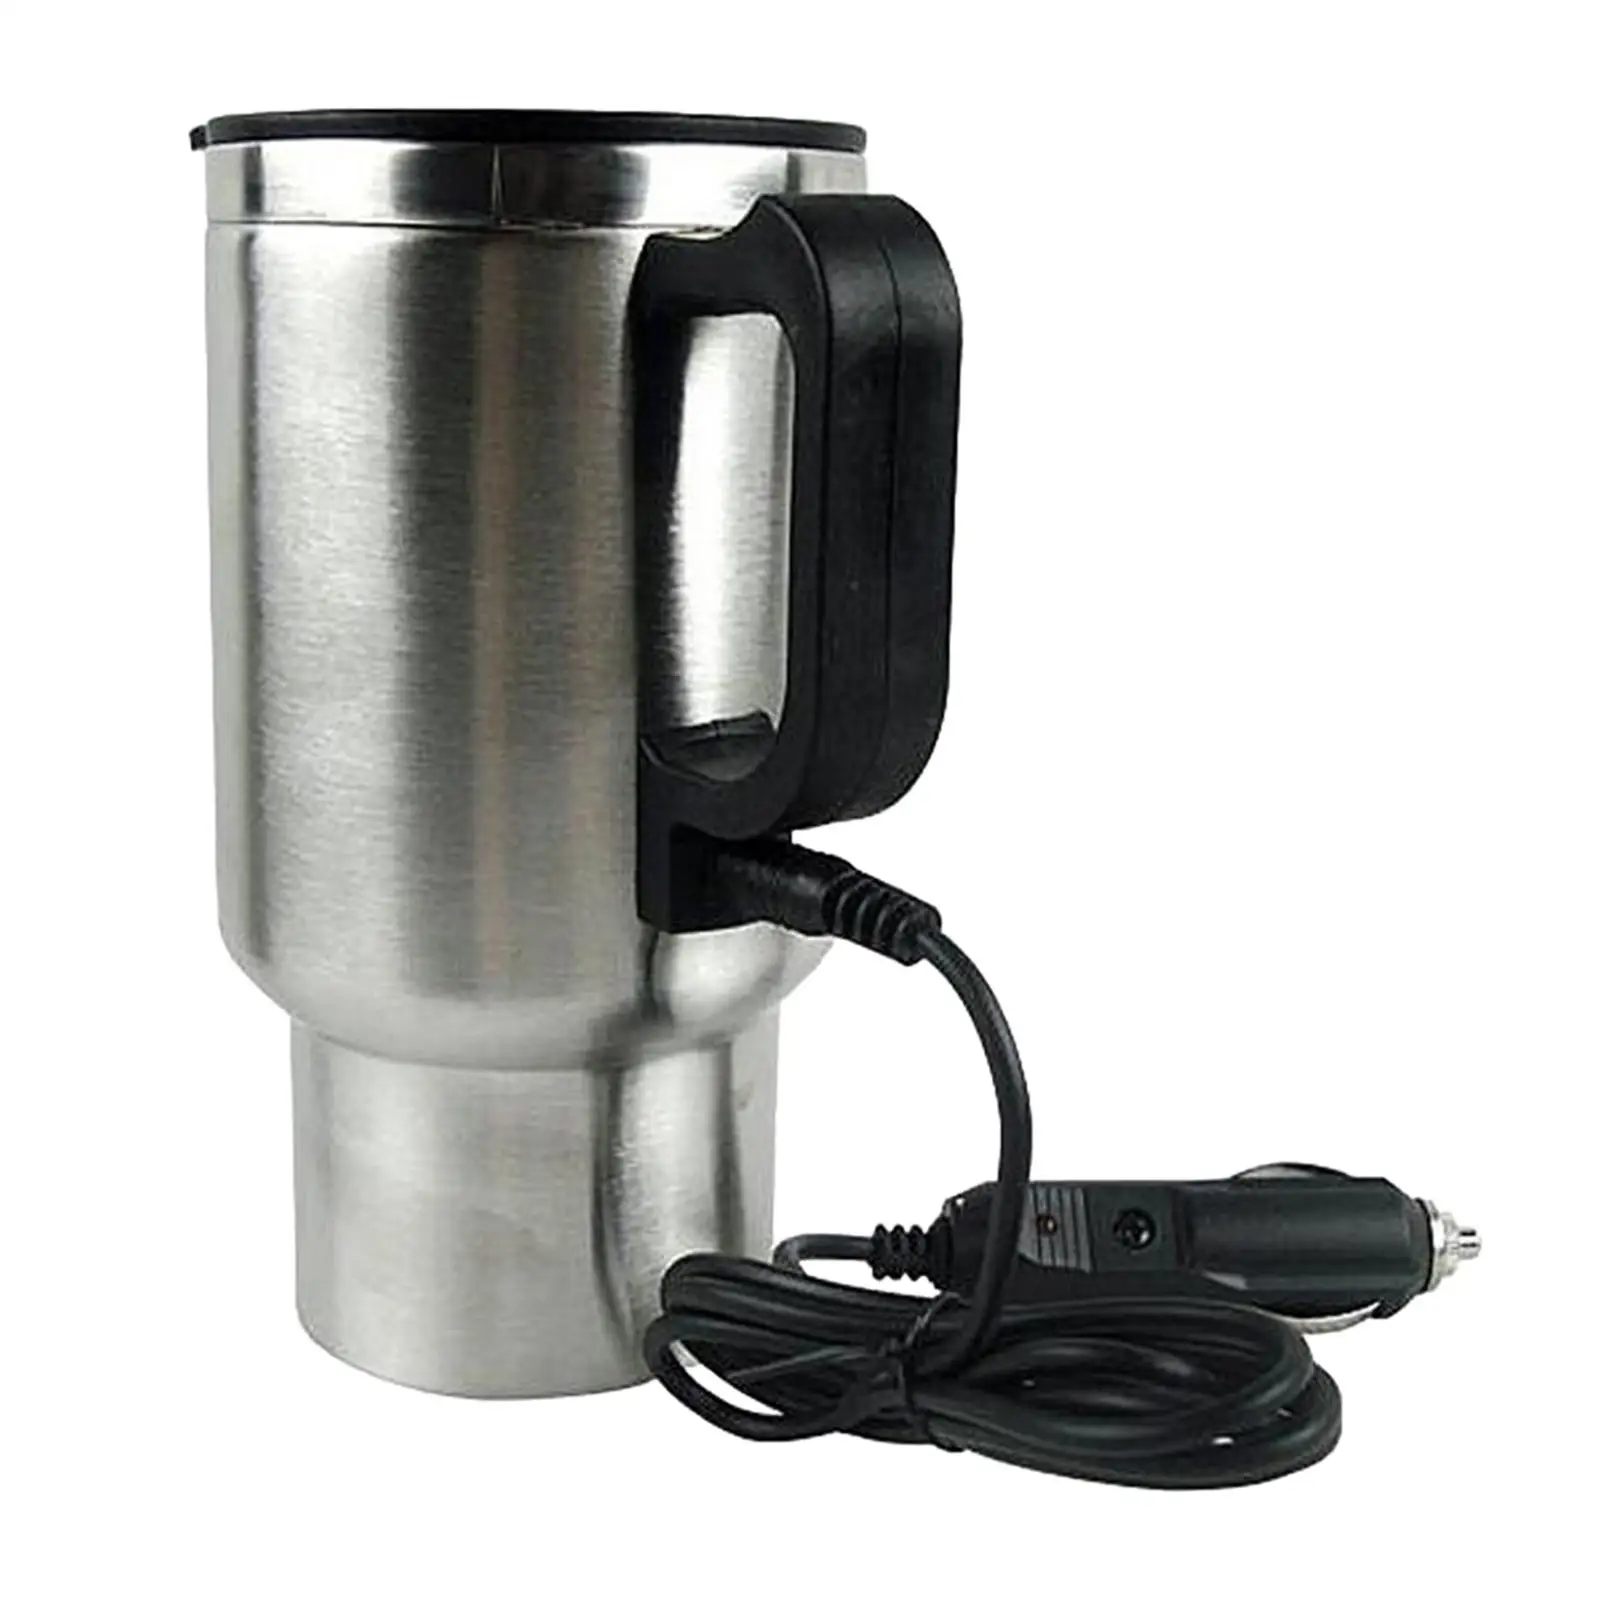 12V 480ml Car Electric Kettle Heated Travel Mug 4.7x6inch Drinking Cup for Drivers, Business Man Good Insulation Effect